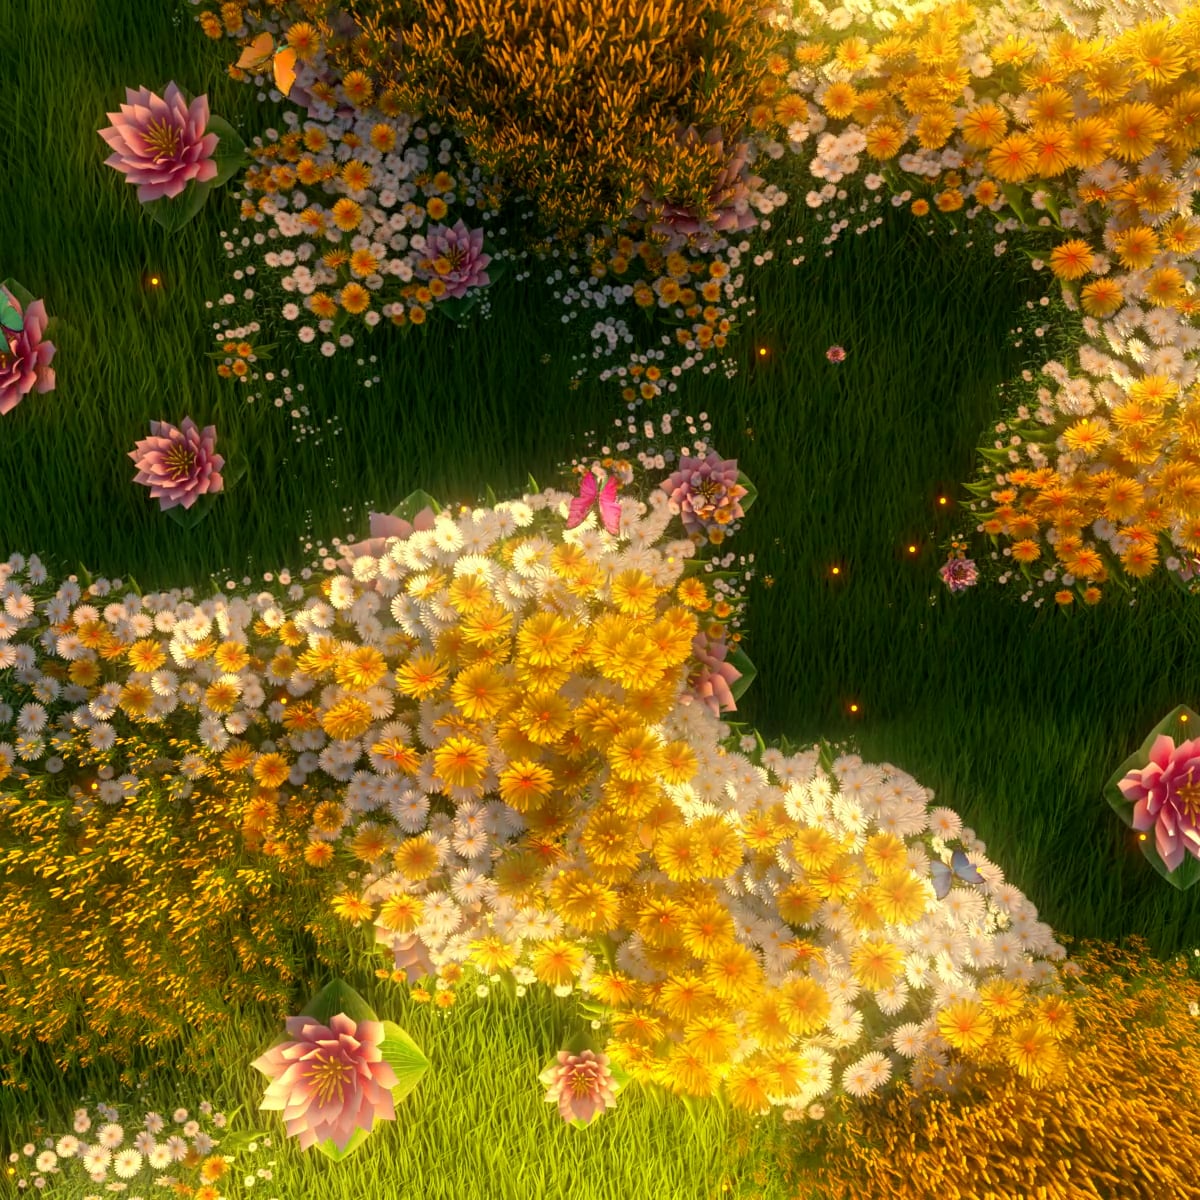 Thumbnail for a video art exhibit featuring a sun-drenched wildflower meadow with a variety of flowers in full bloom, creating an immersive and captivating display of natural beauty.